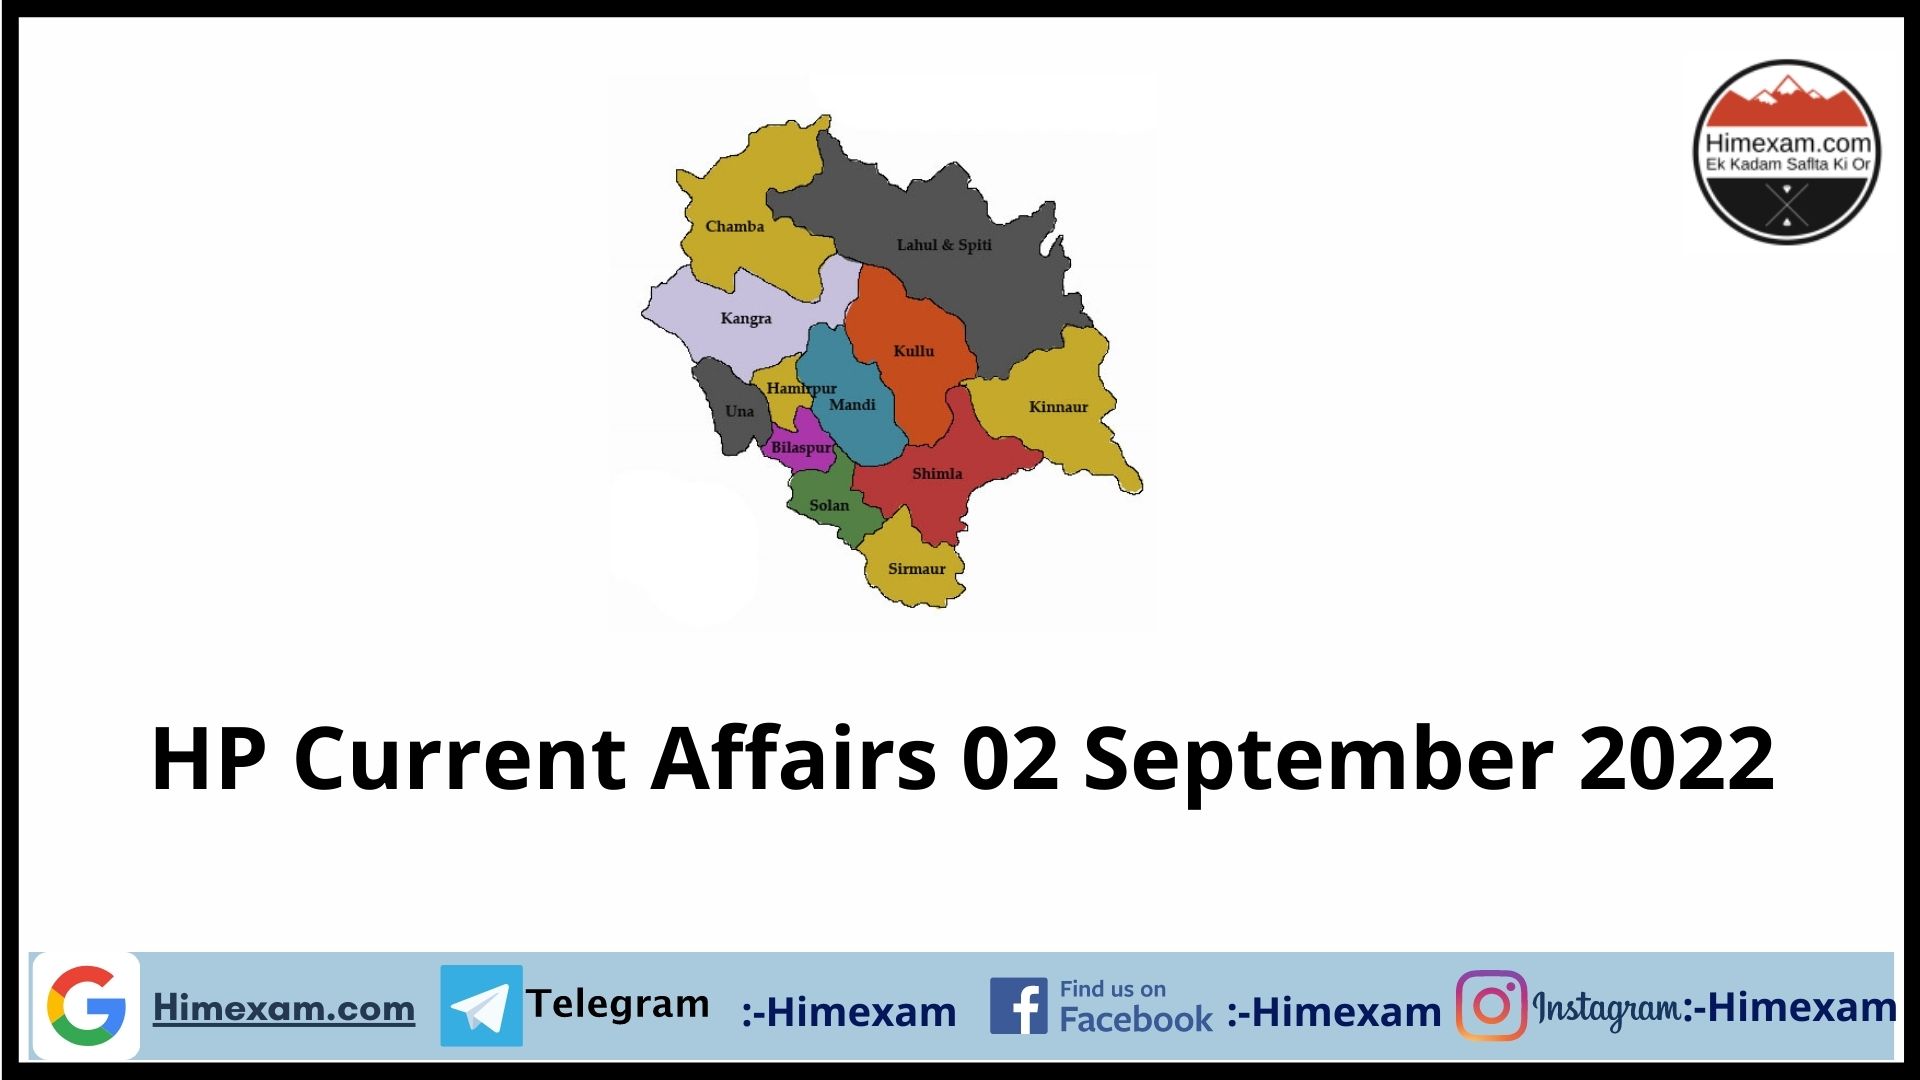 HP Current Affairs 02 September 2022